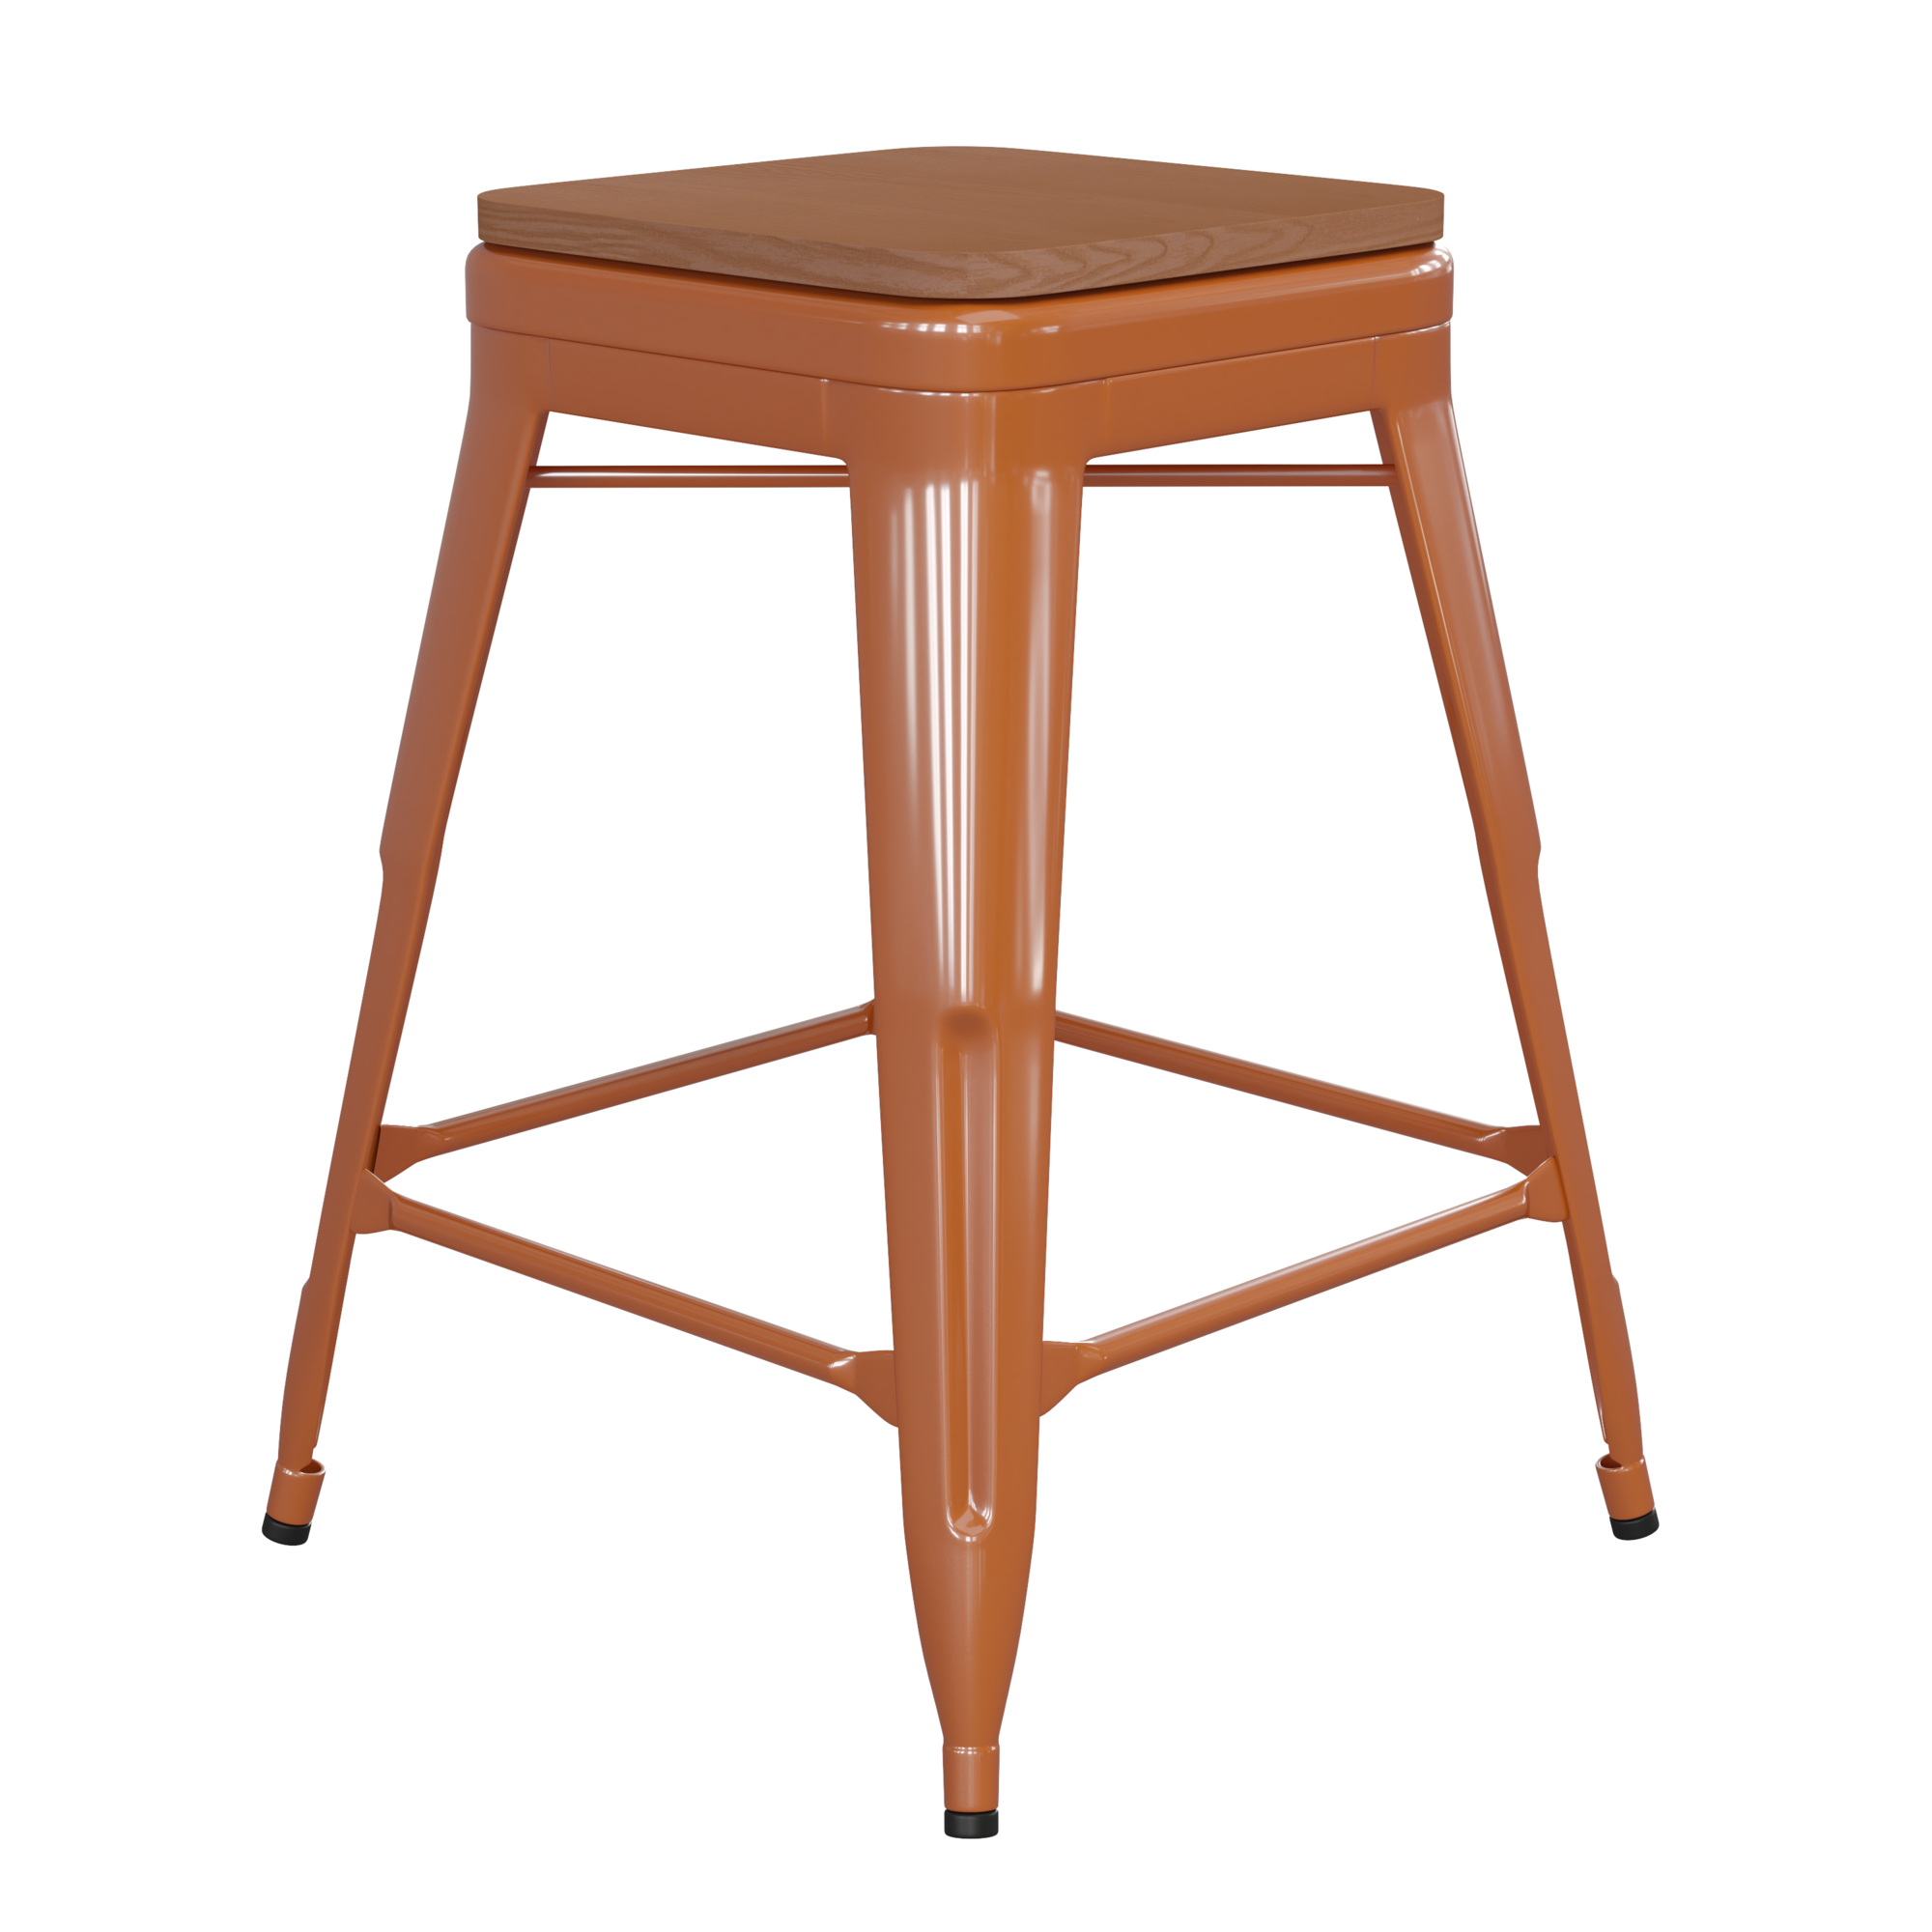 Flash Furniture, 24Inch Orange Metal Stool-Teak Poly Seat, Primary Color Orange, Included (qty.) 1, Model CH3132024ORPL2T